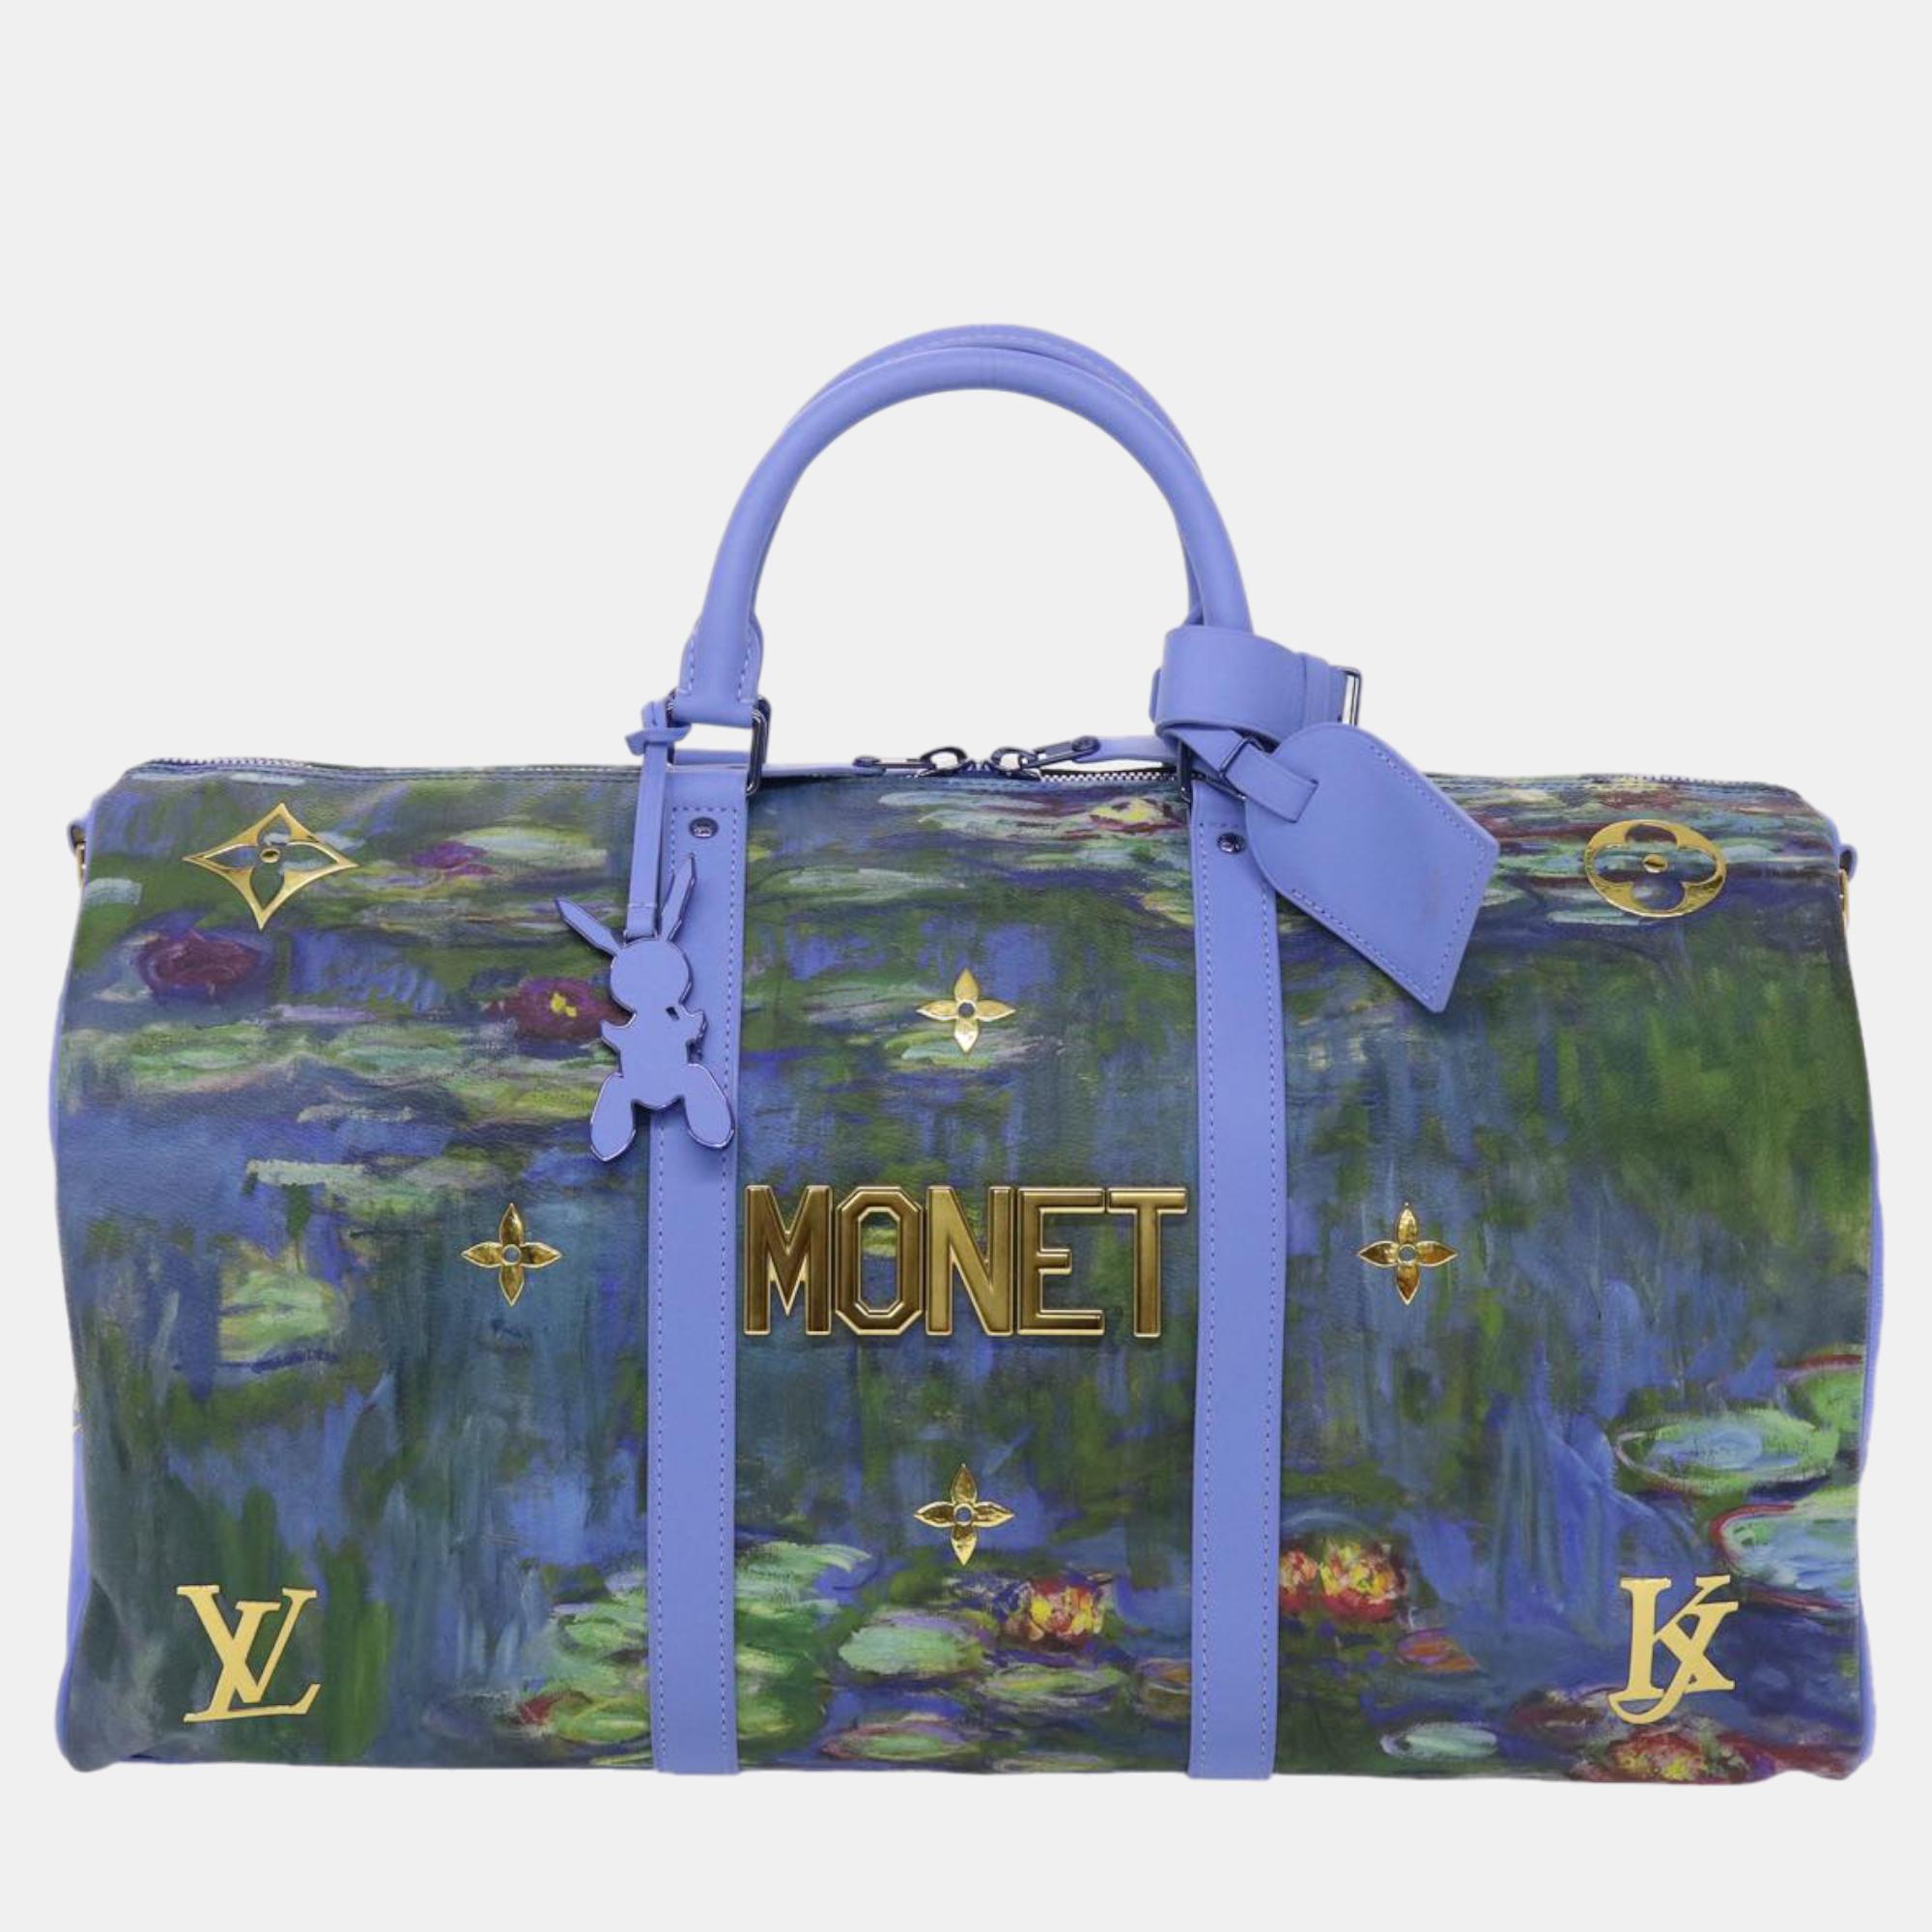 

Louis Vuitton x Jeff Koons Multicolor Masters Collection Manet 50 Speedy Bandouliere Duffel Bags, Blue